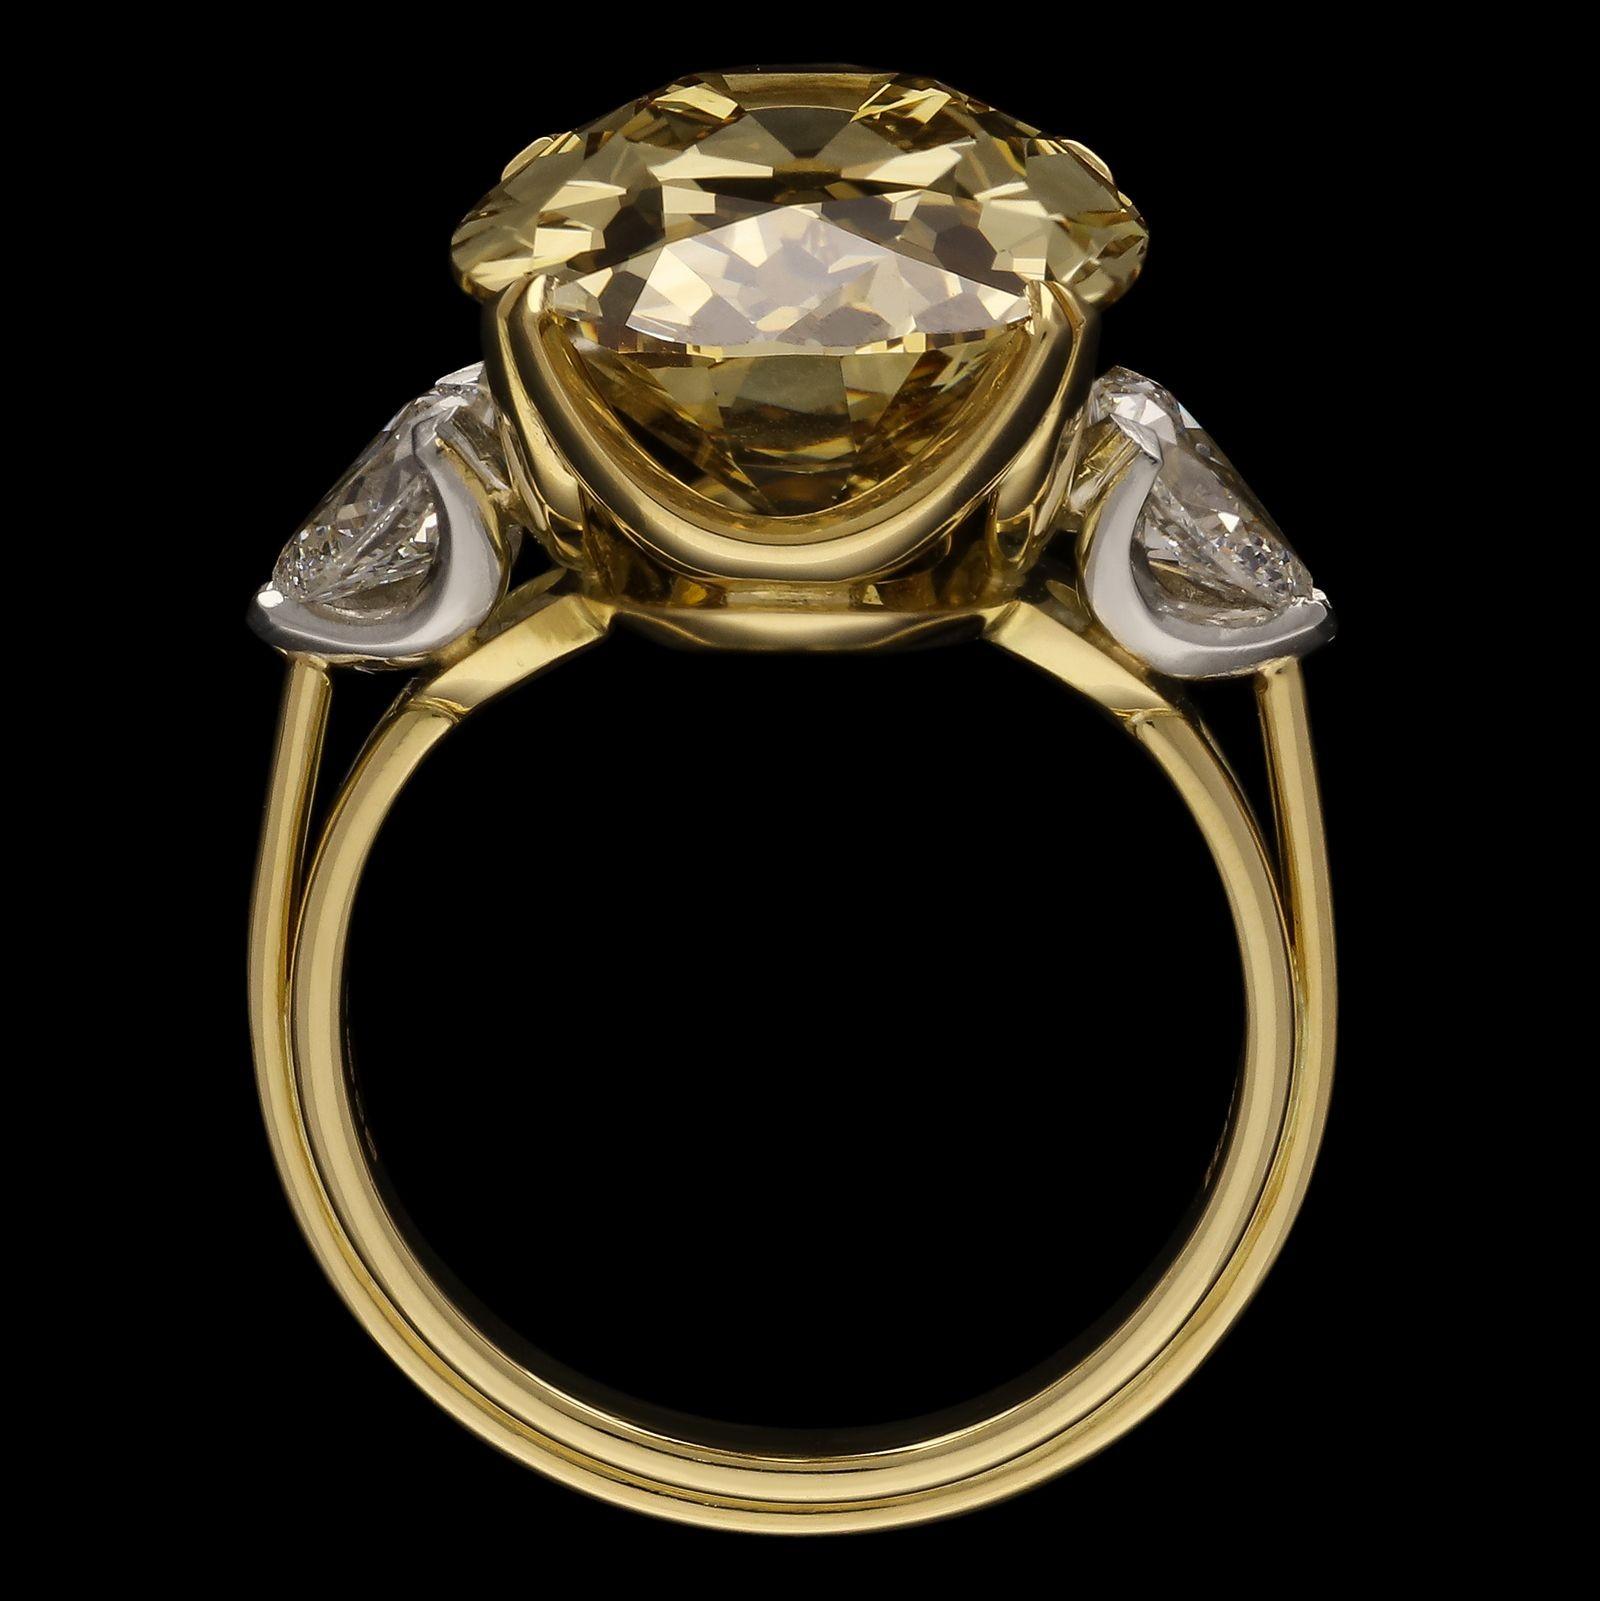 Description
A stunning fancy colour diamond ring by Hancocks, set with an oval shaped old cut diamond weighing 11.15cts and of Fancy Deep Brownish Yellow colour and VVS2 clarity claw set in 18ct yellow gold to an open scalloped gallery between